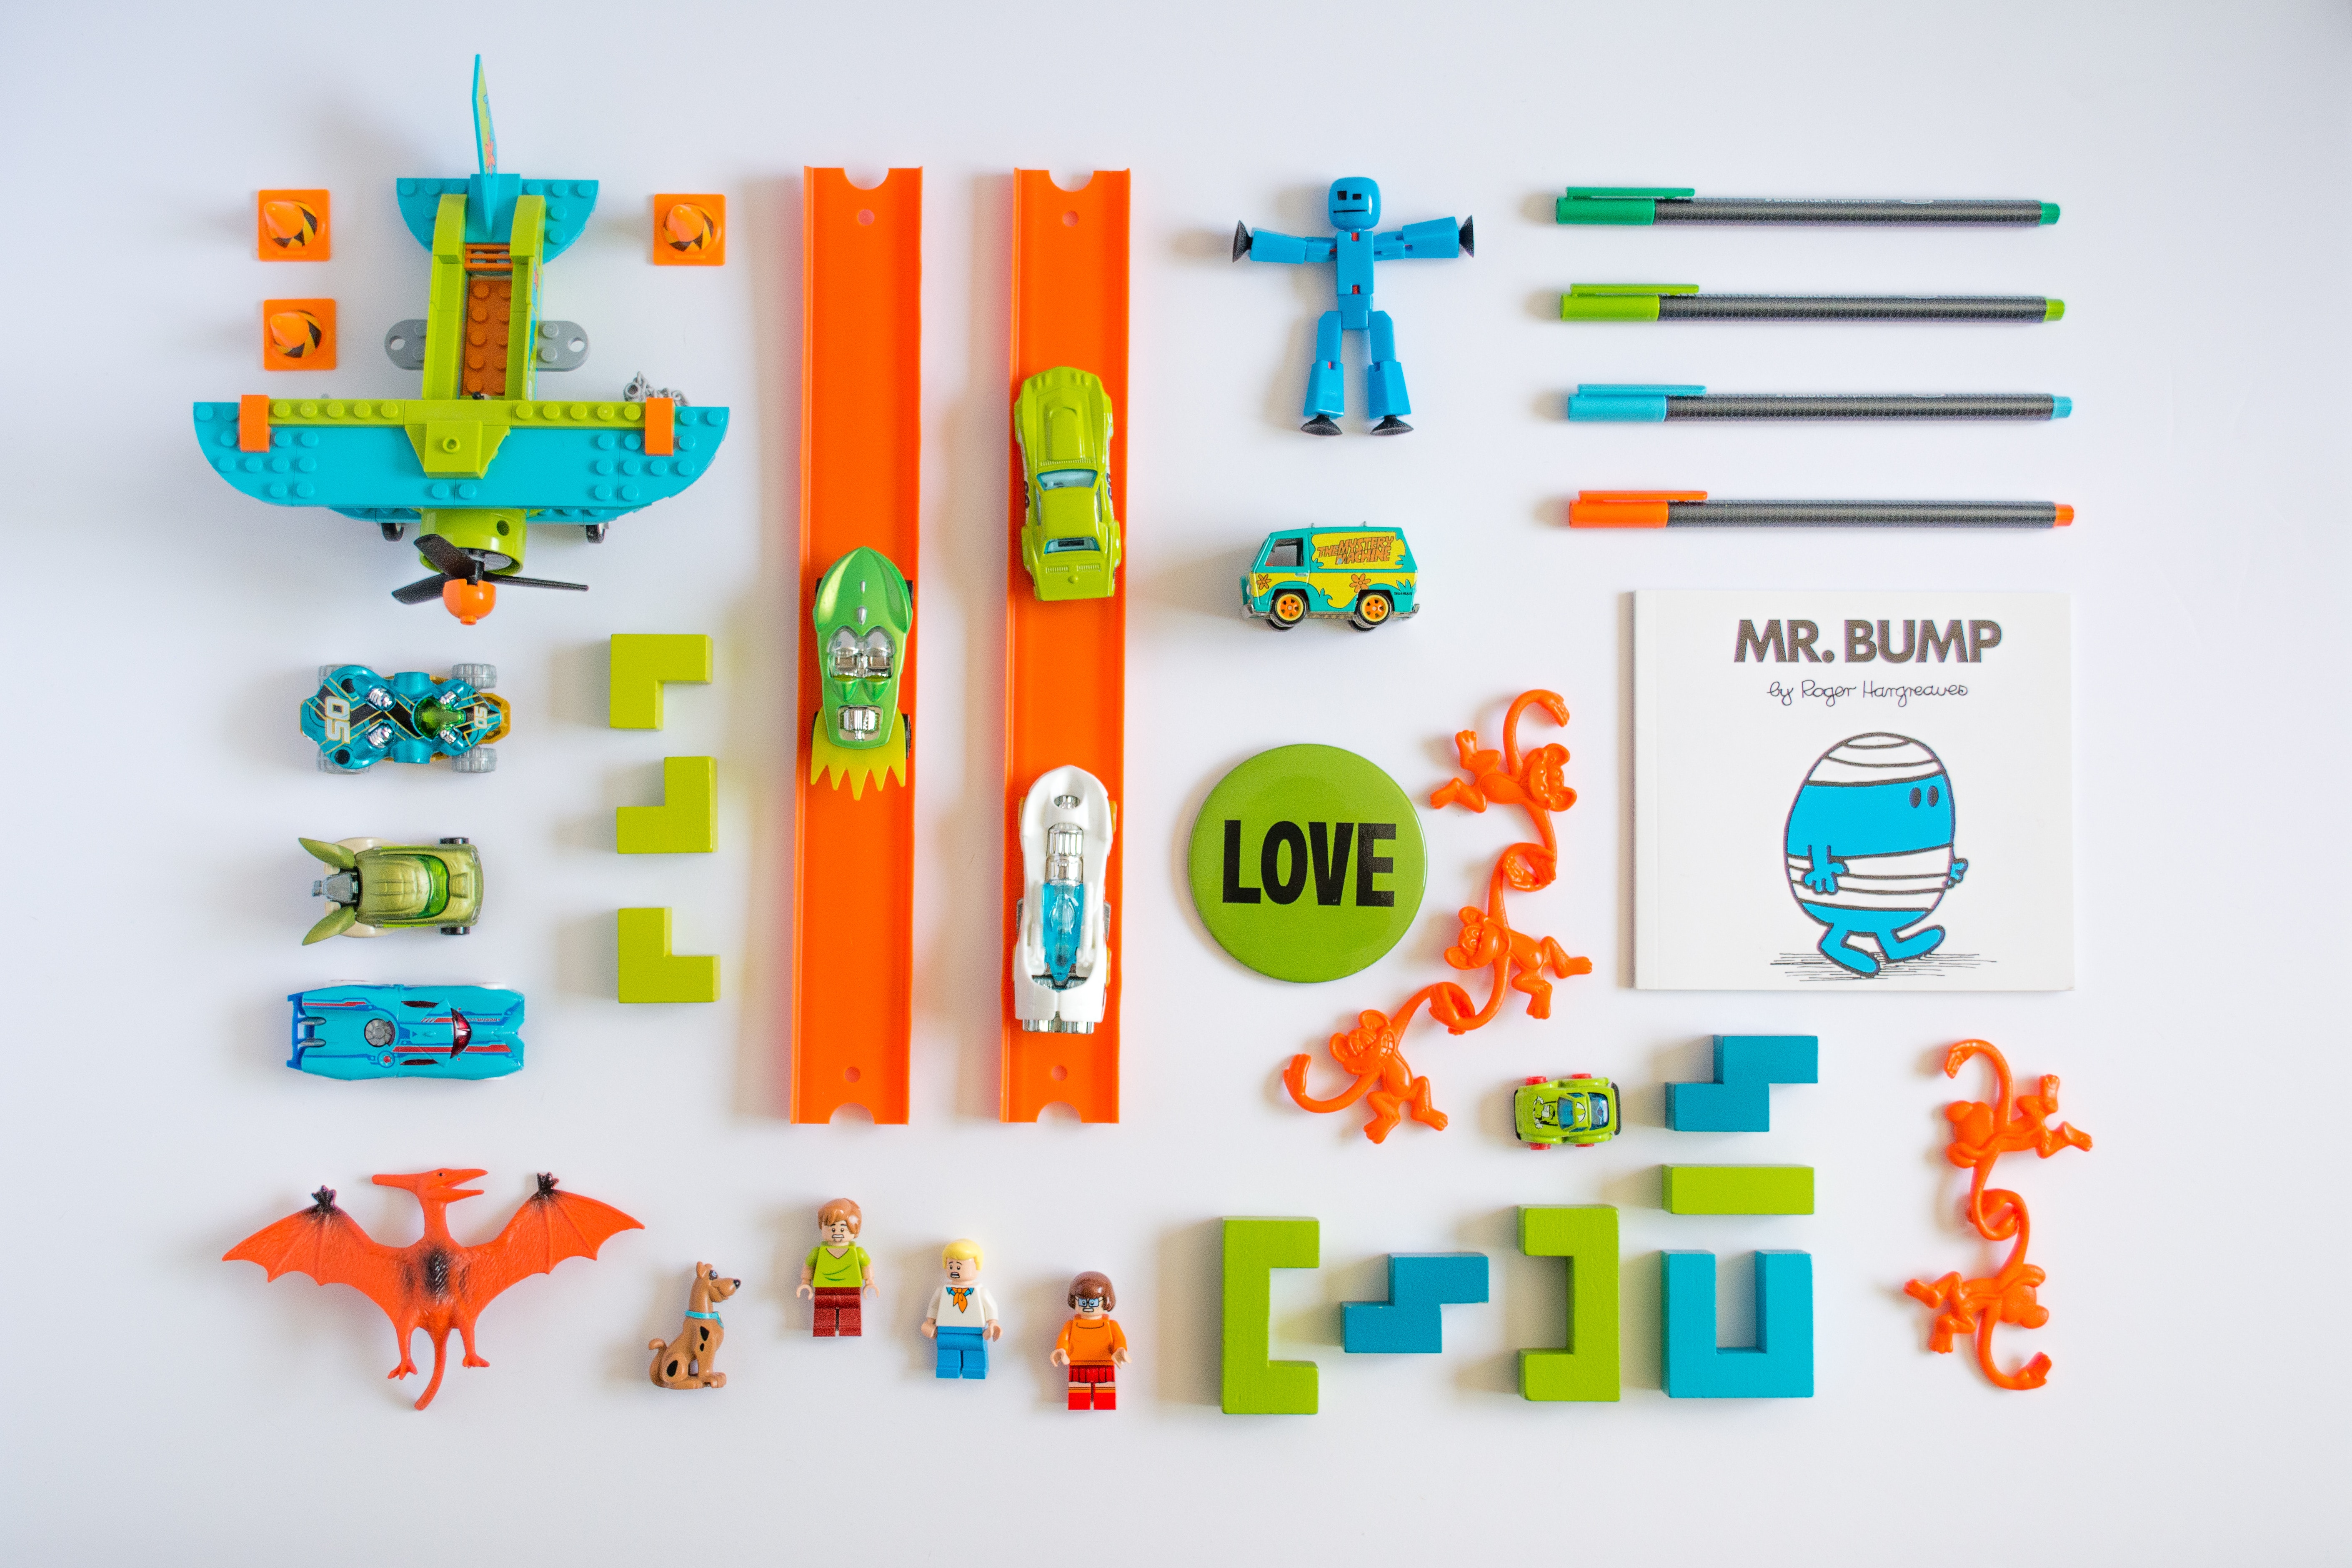 Orange toys neatly organized in a rectangular area, comprised of lego, dinosaurs, race cars, books, robots, monkeys, and a button that says love.